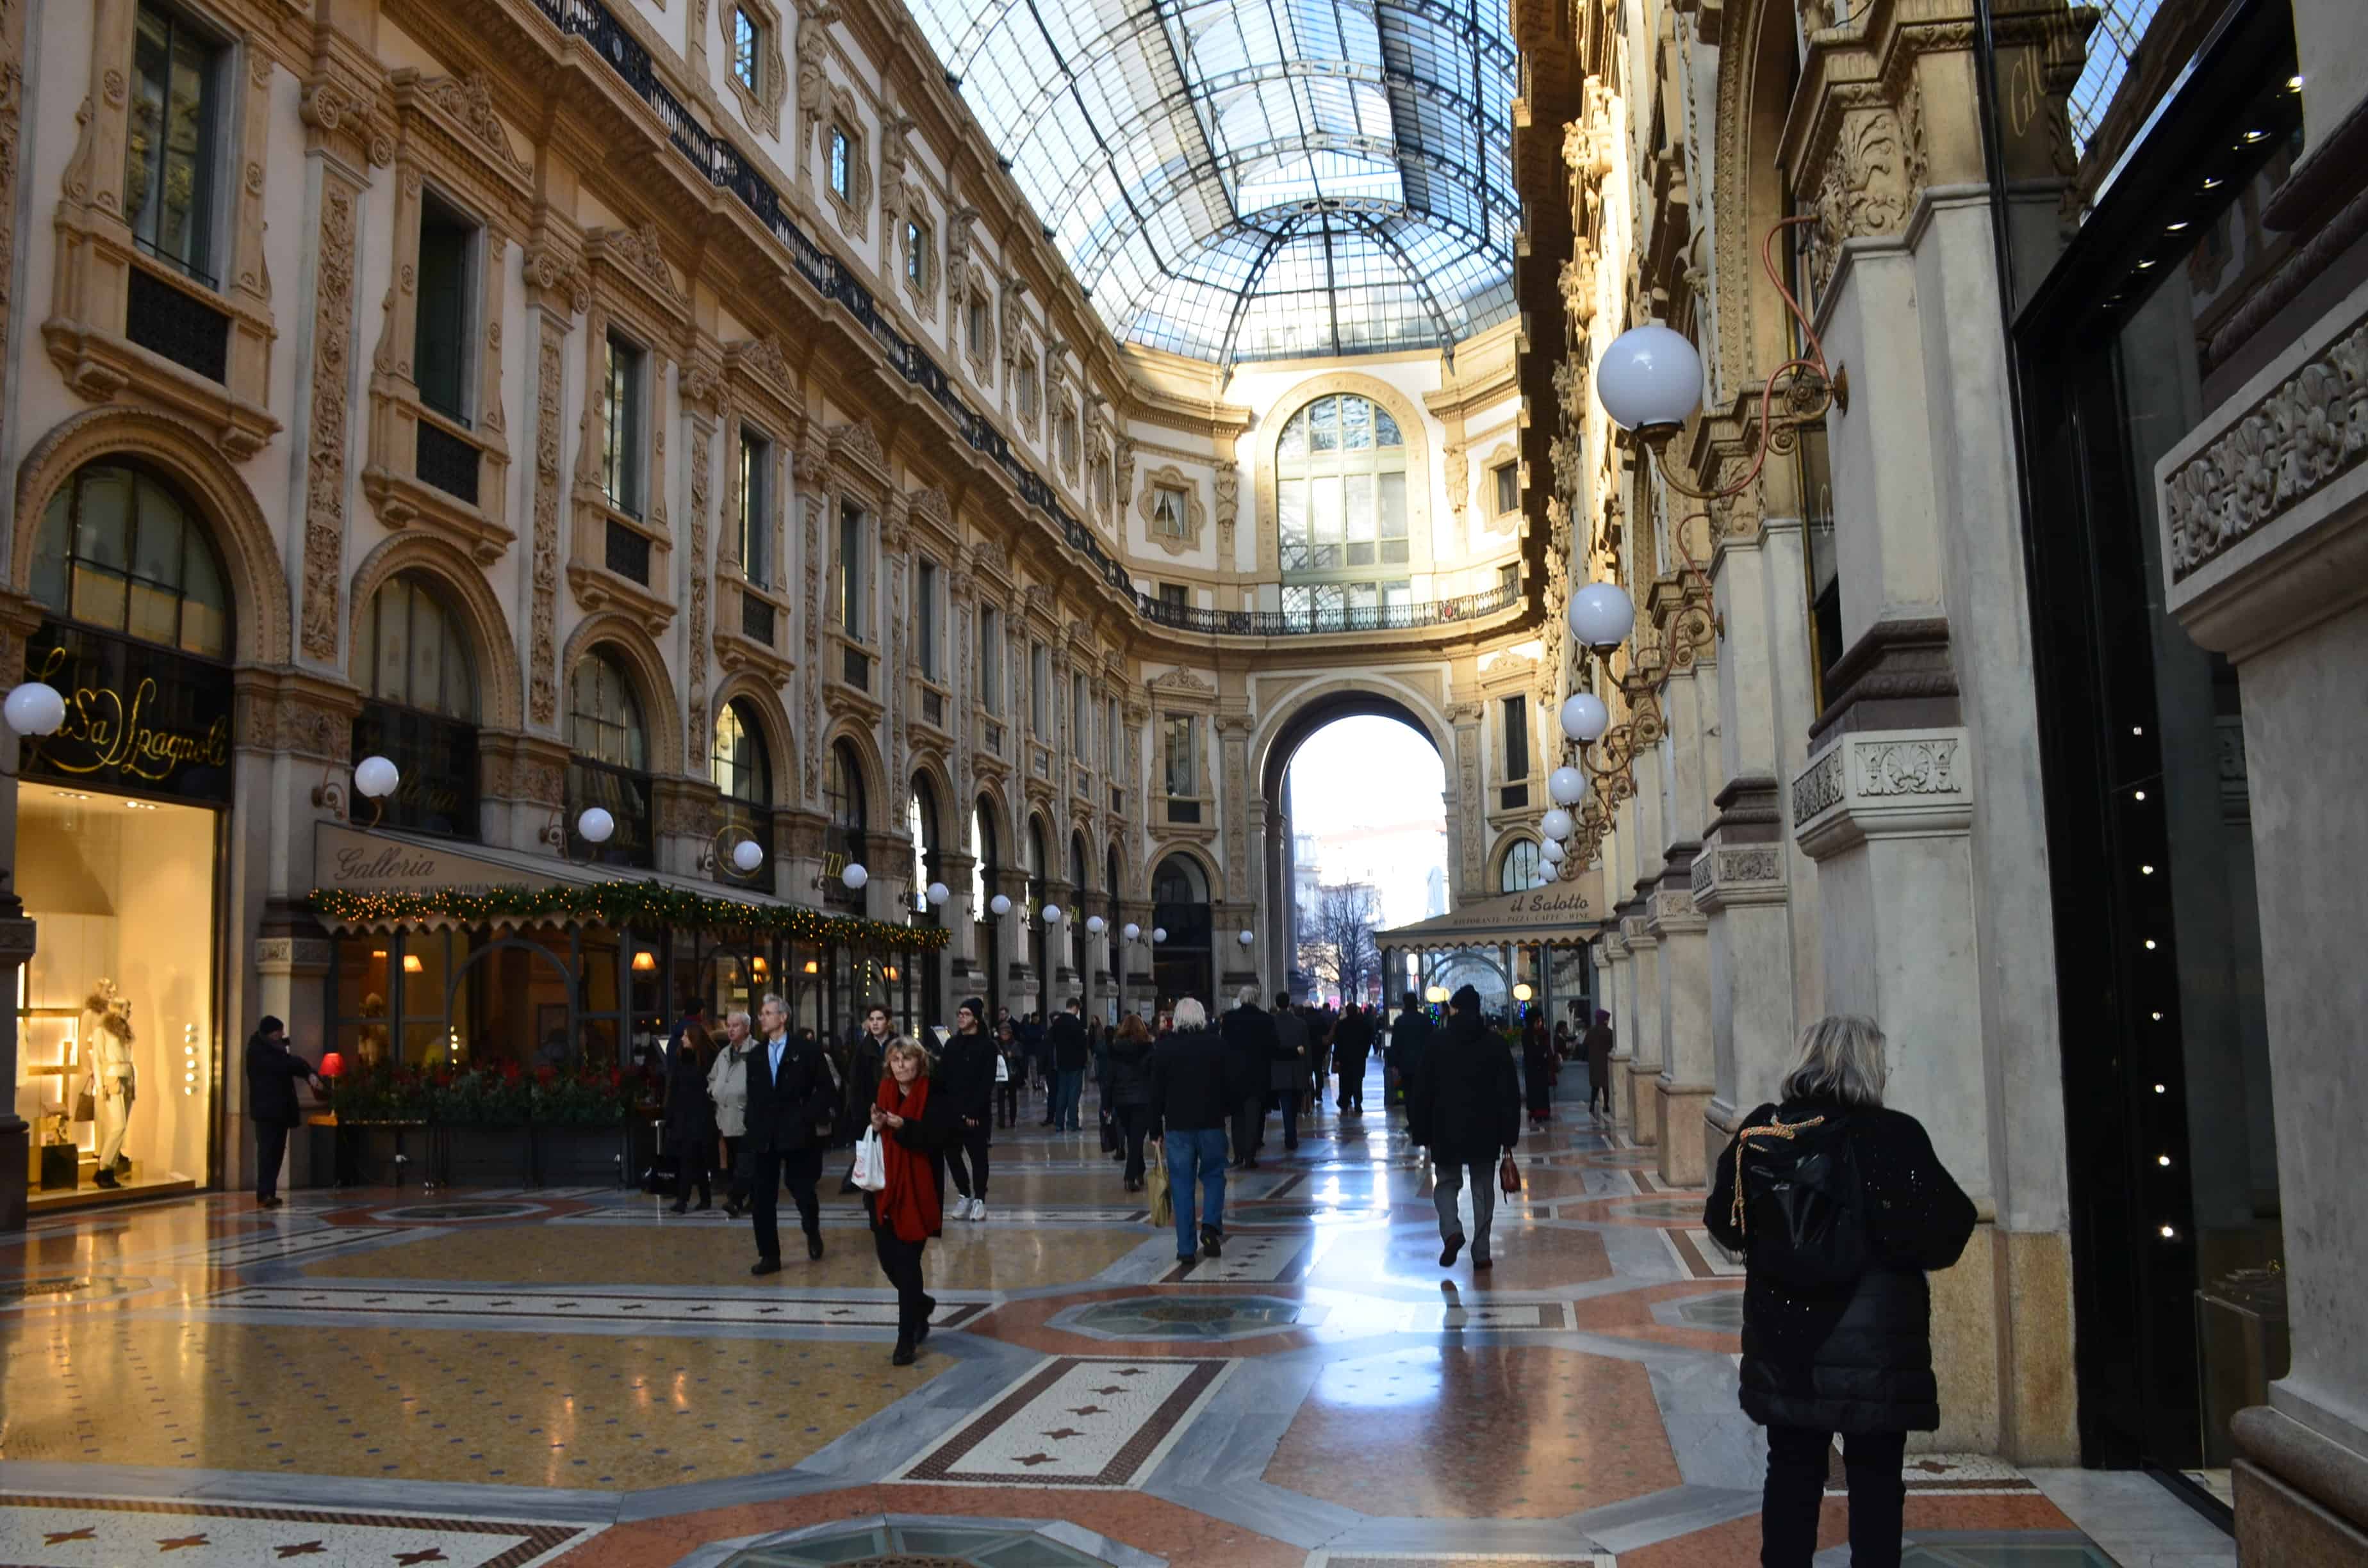 Looking down a section of the Vittorio Emanuele II Gallery in Milan, Italy